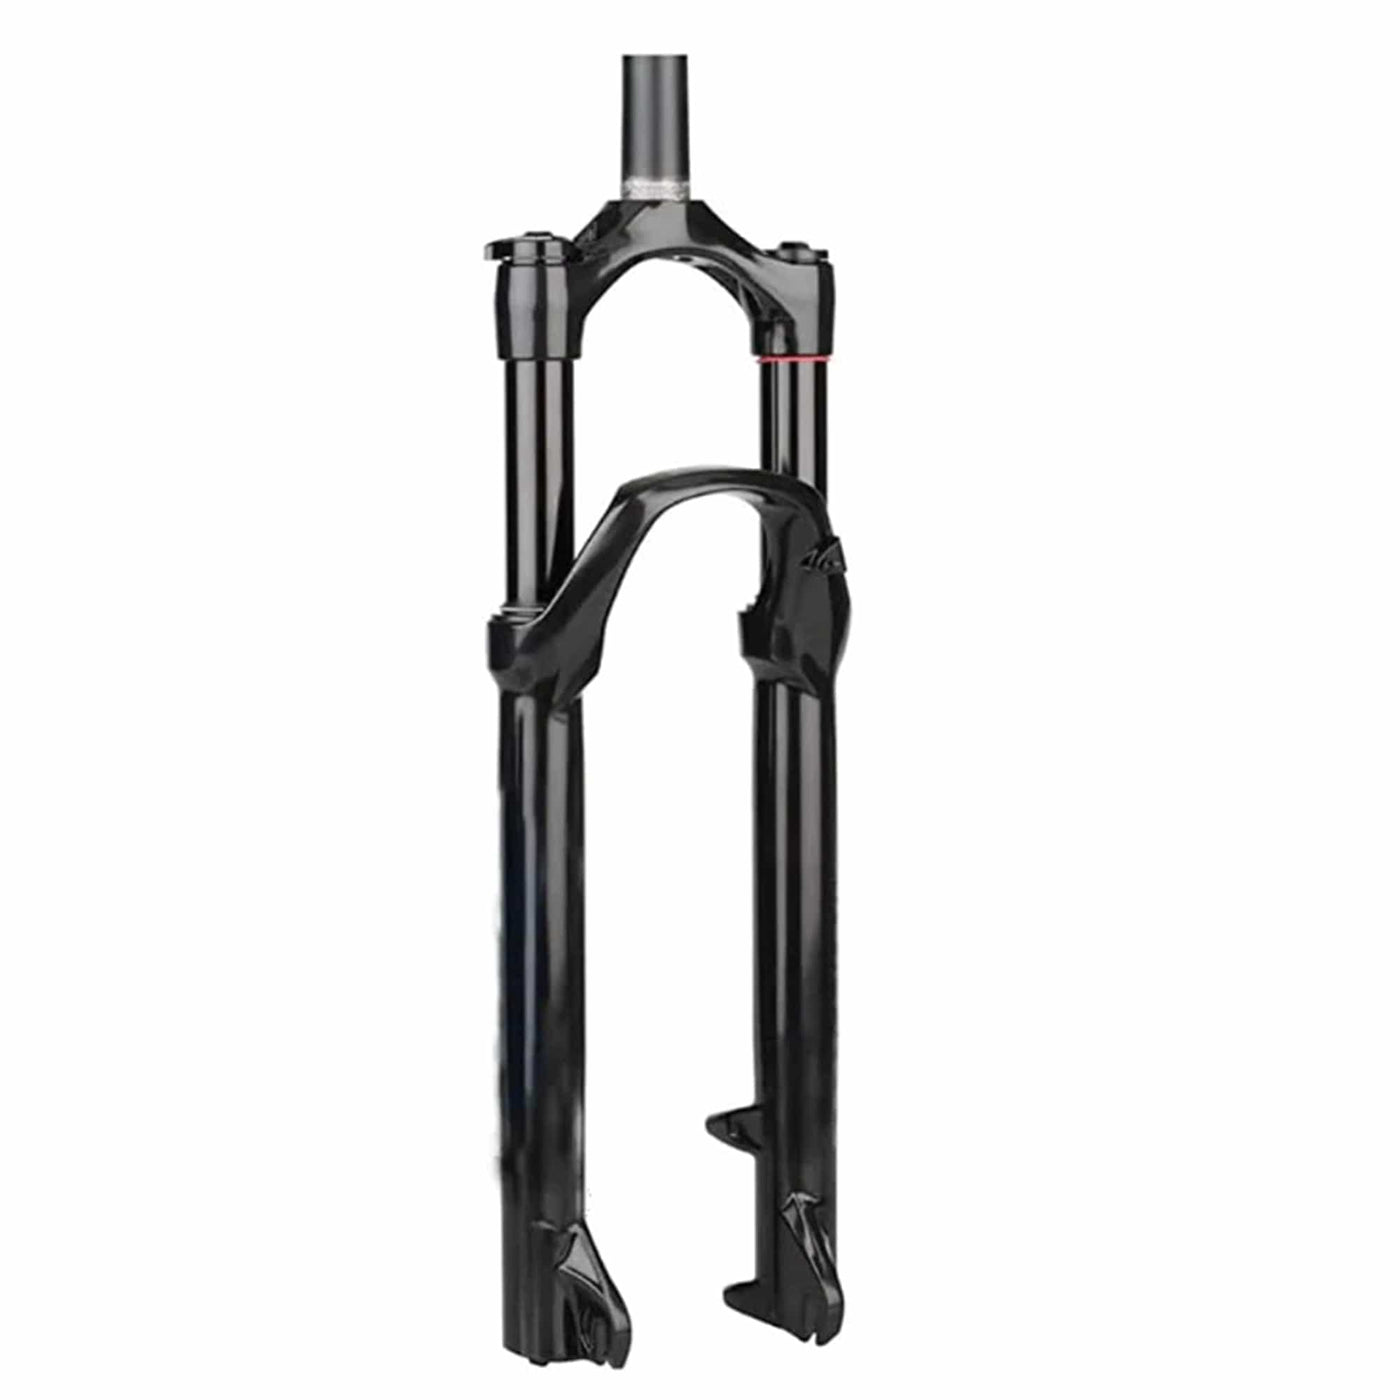 Hummer-Pro Fork Accessories